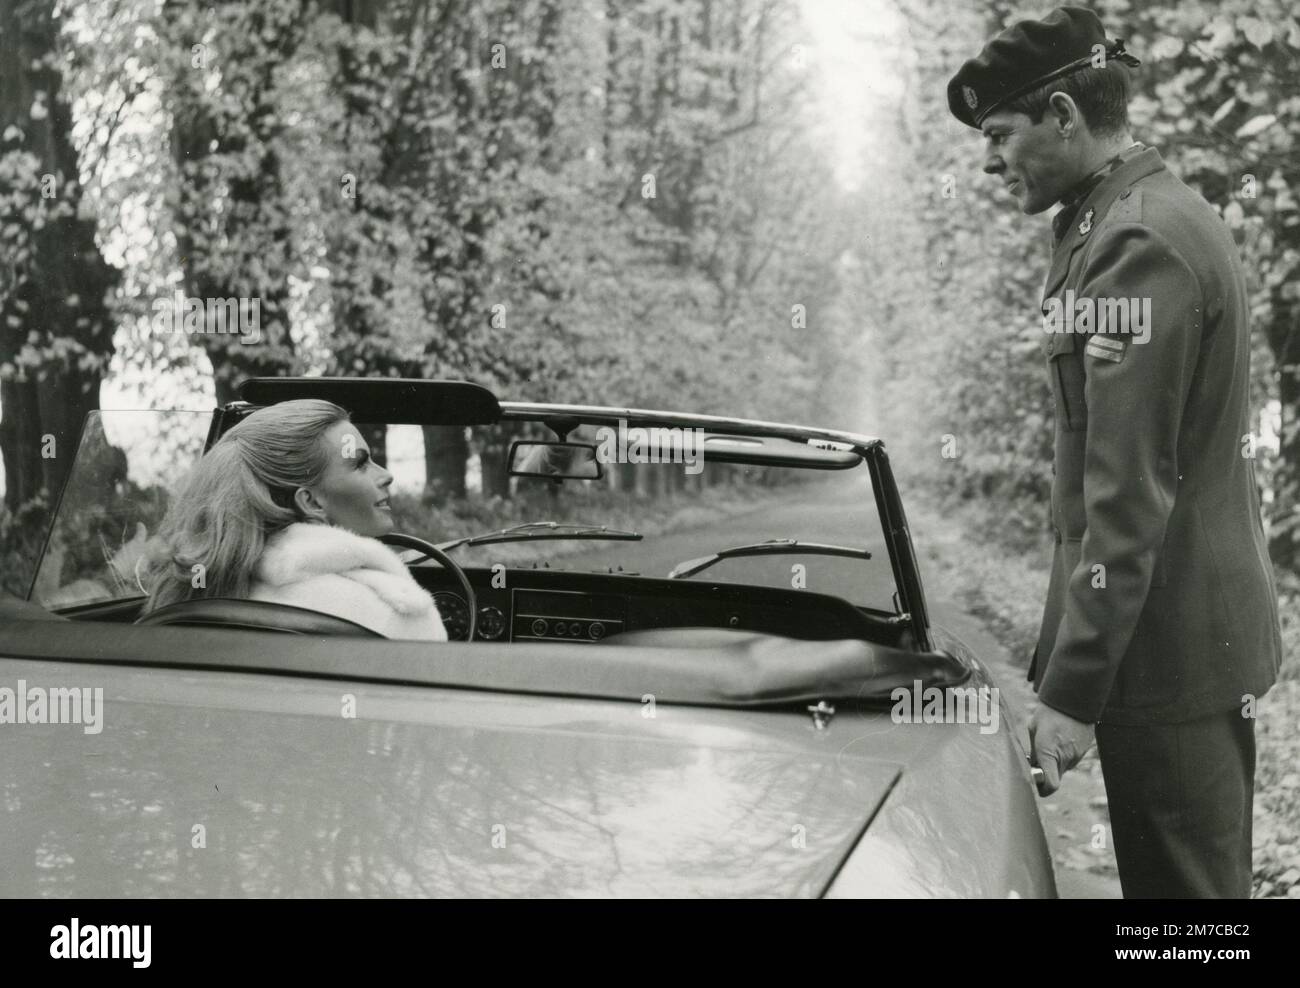 Danish actor Willy Rathnov and actress Hanne Borchsenius in the movie There came a soldier (Det kommer en soldat), Denmark 1969 Stock Photo